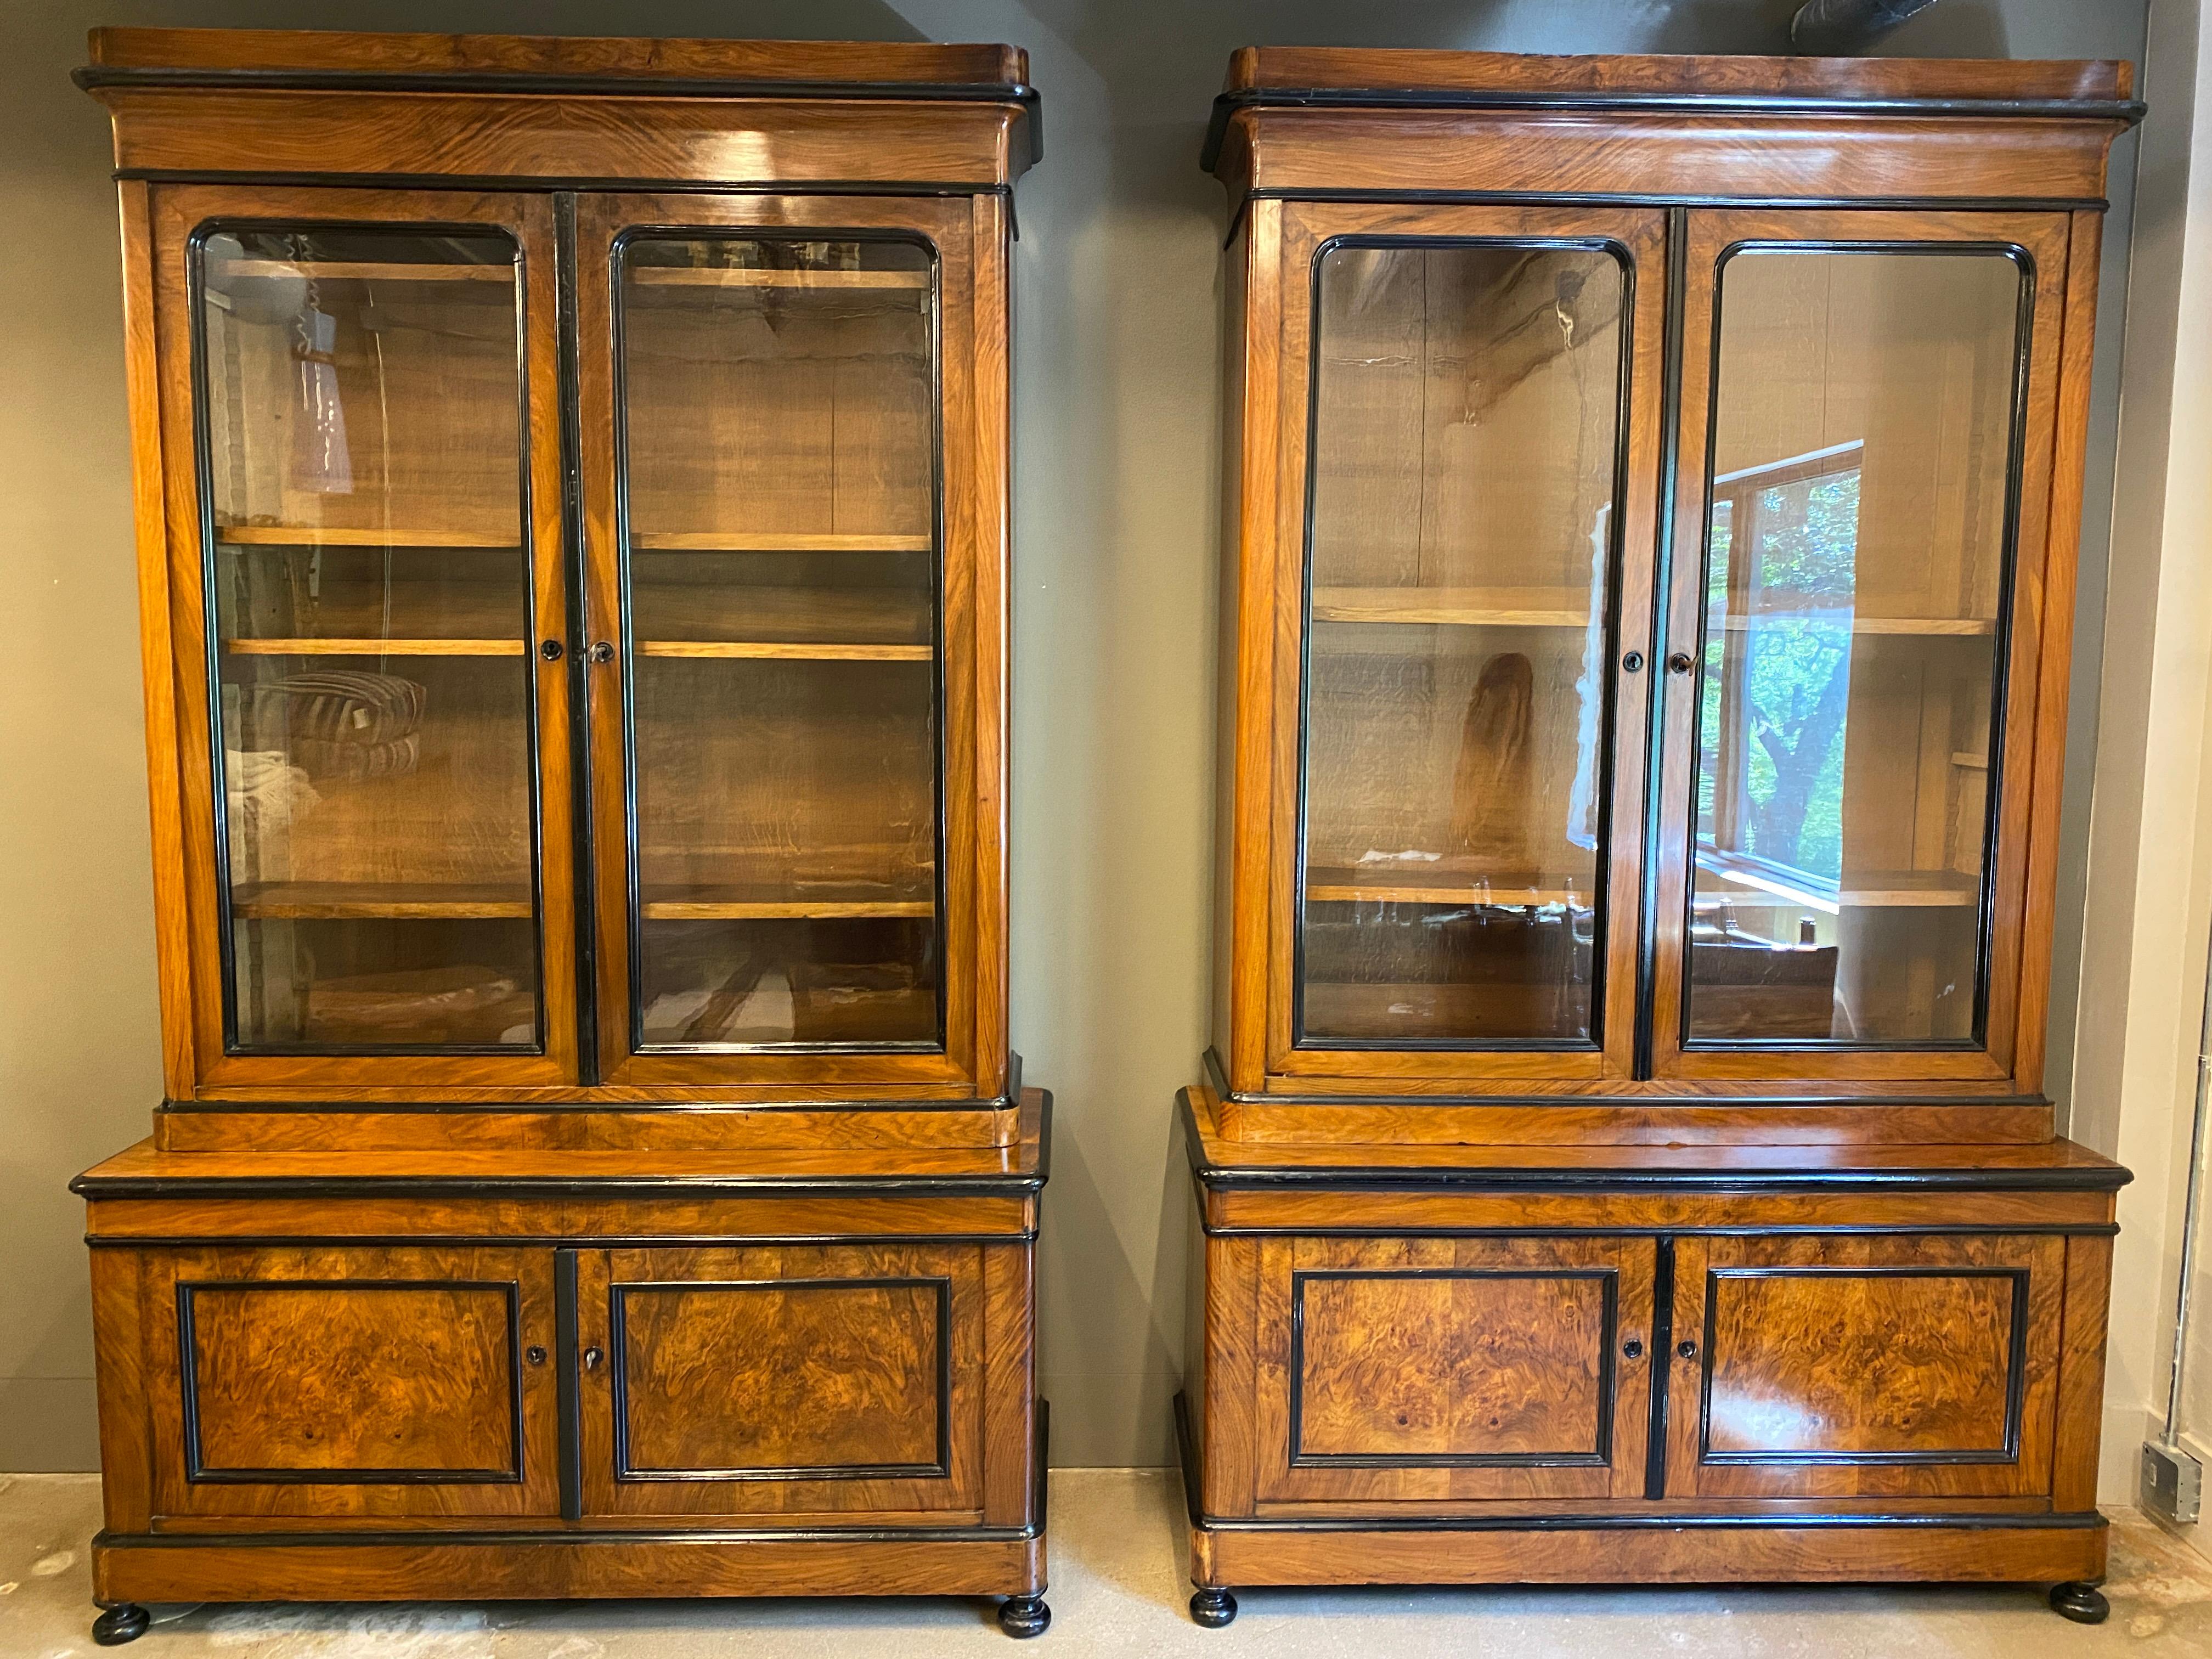 Hard to find pair of large scale Austrian Biedermeier step-back cabinets of burled walnut or fruitwood with black ebonized accents. Top section has double glass doors and four adjustable oak interior shelves. Base has panel doors and single interior